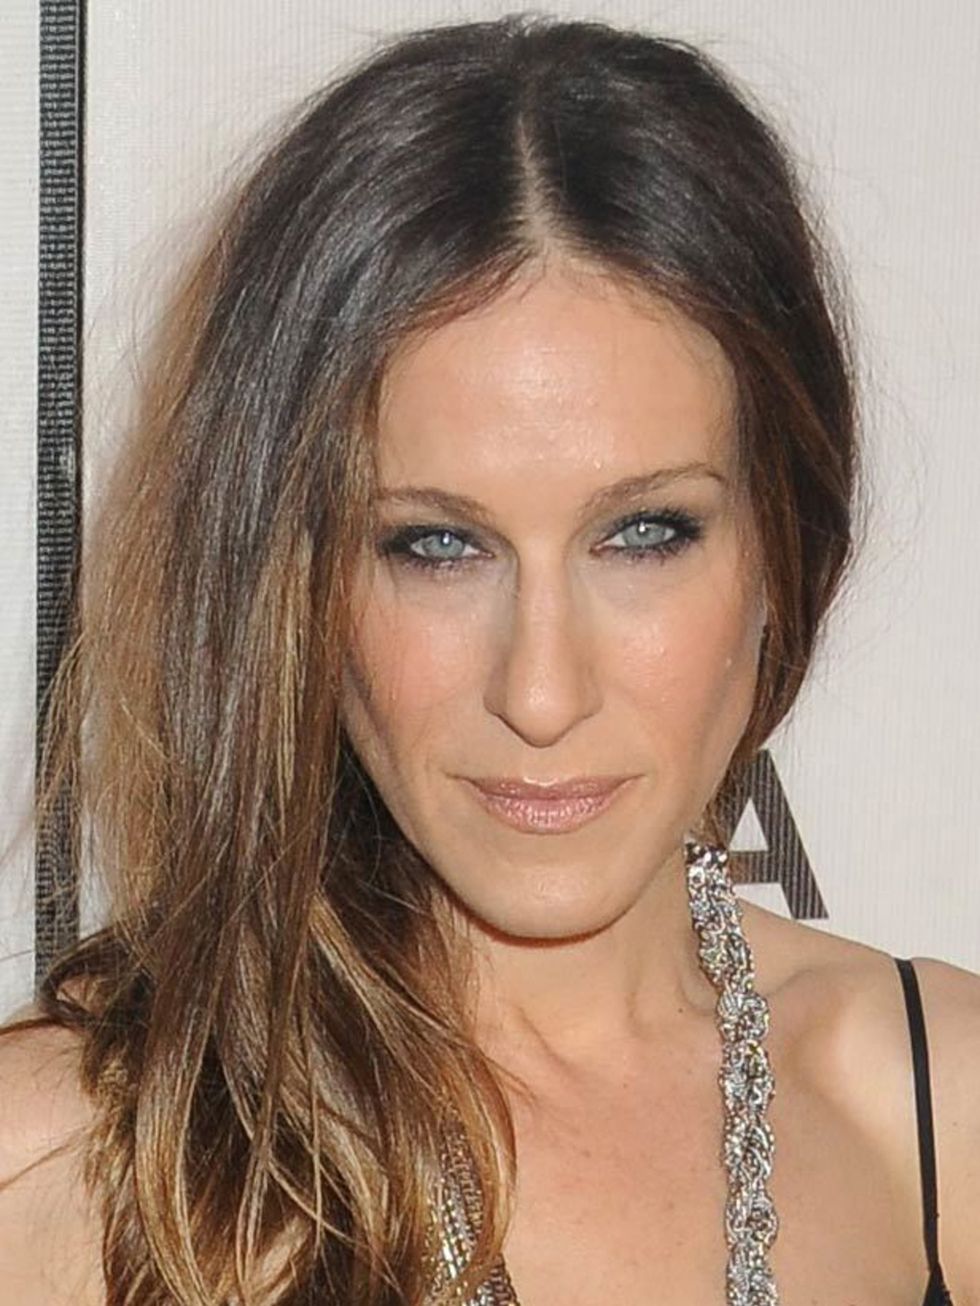 <p><a href="http://www.elleuk.com/starstyle/celeb-shopping-list/%28section%29/celebrity-shopping-list-sarah-jessica-parker">Click to see more of Sarah</a></p>